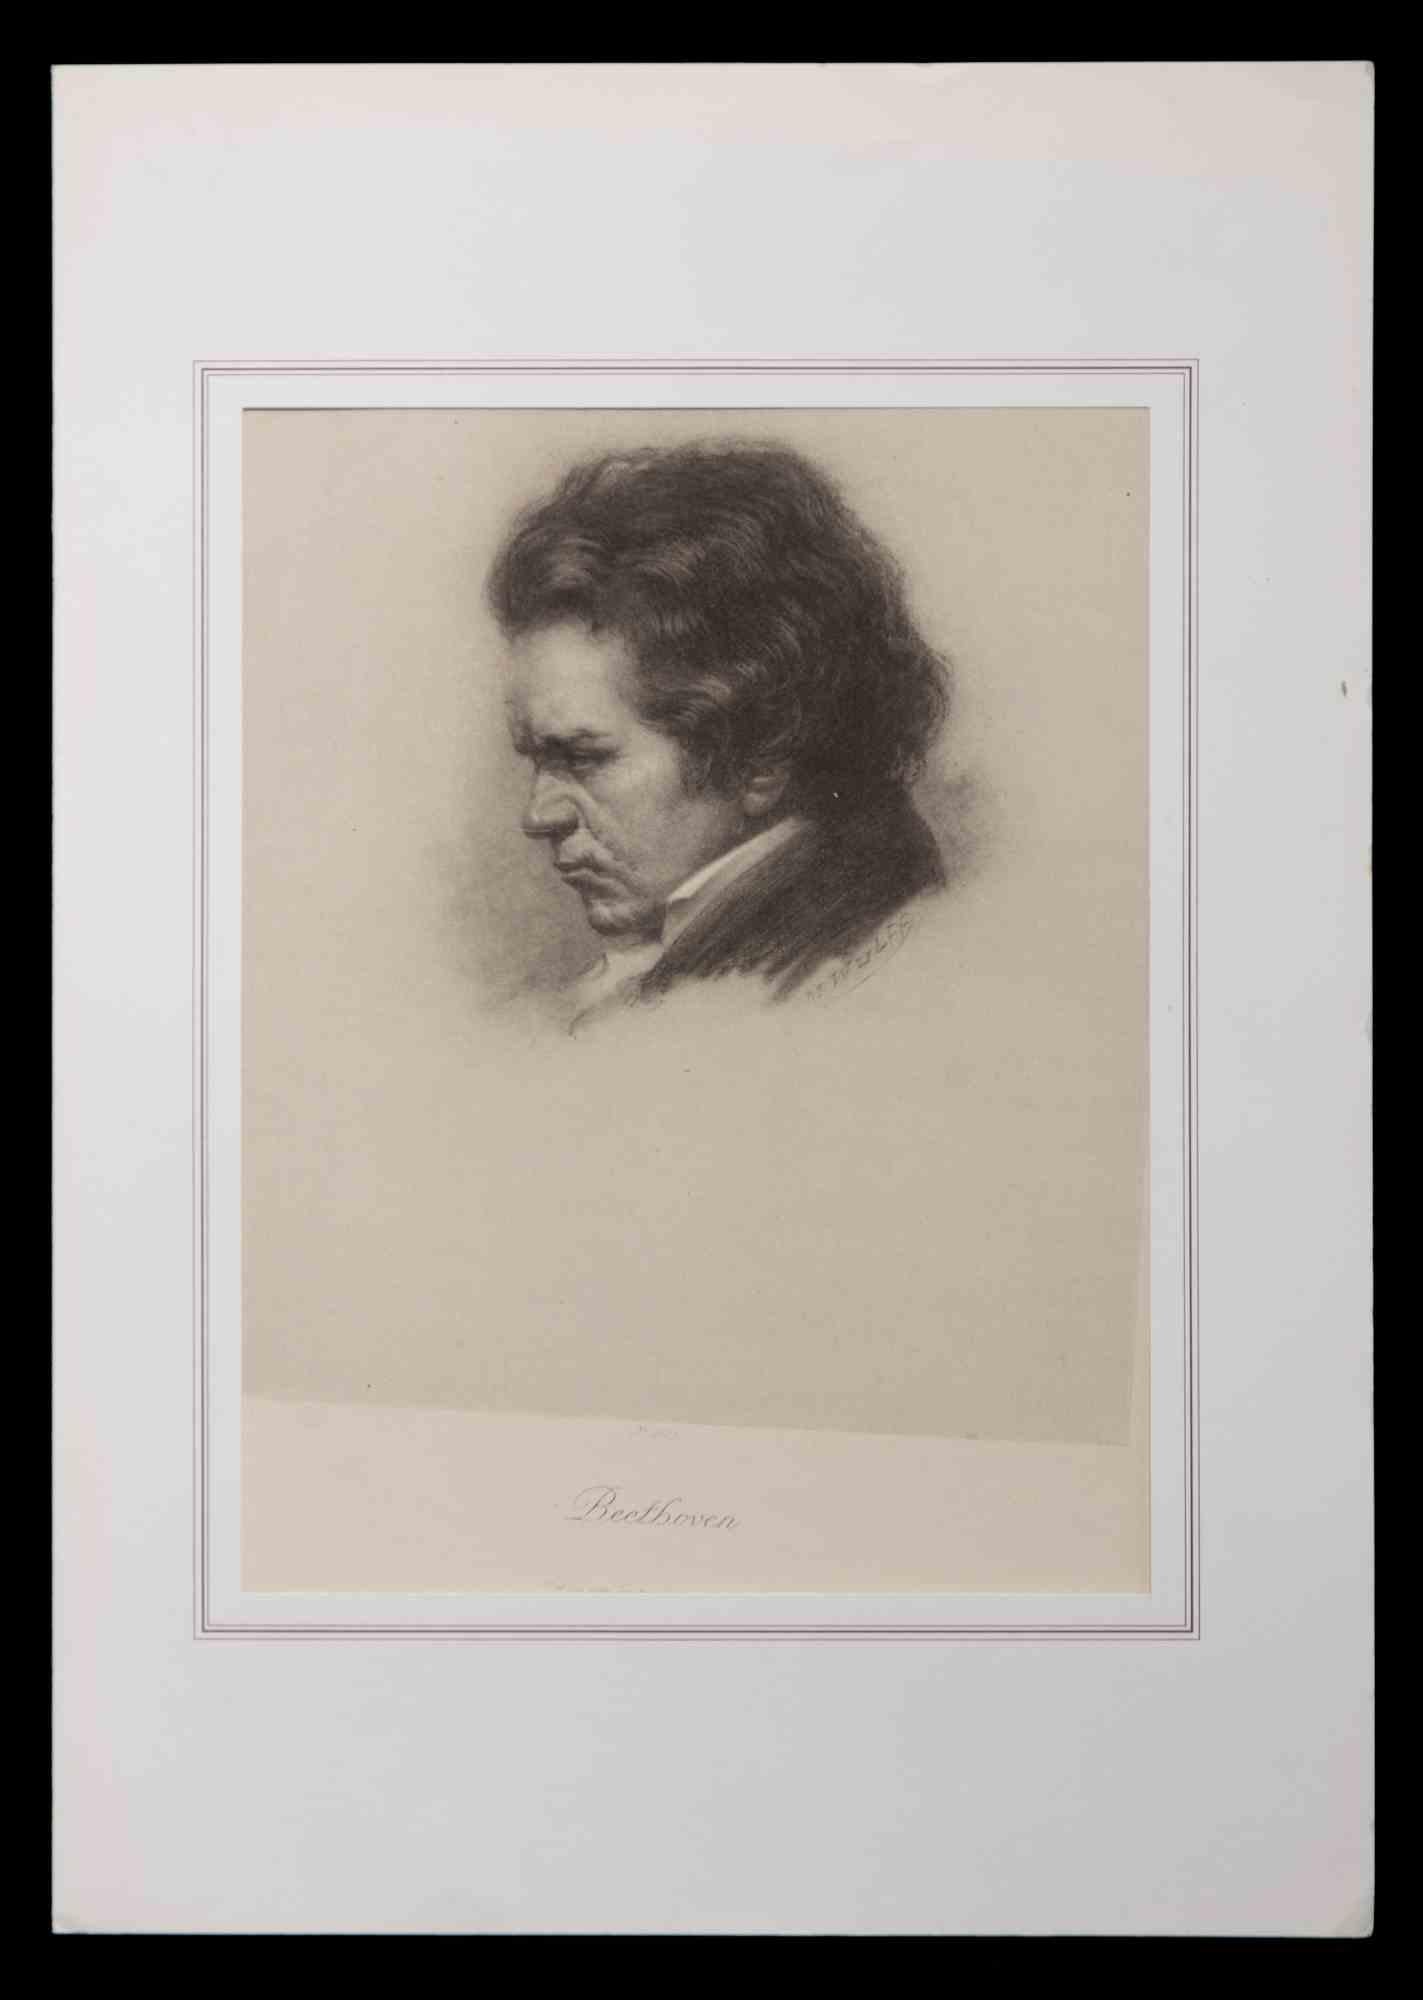 Portrait of Ludwig Van Beethoven is an  artwork realized in 1920 ca. by Max Wulff.

Black and white lithograph.

Not signed. 